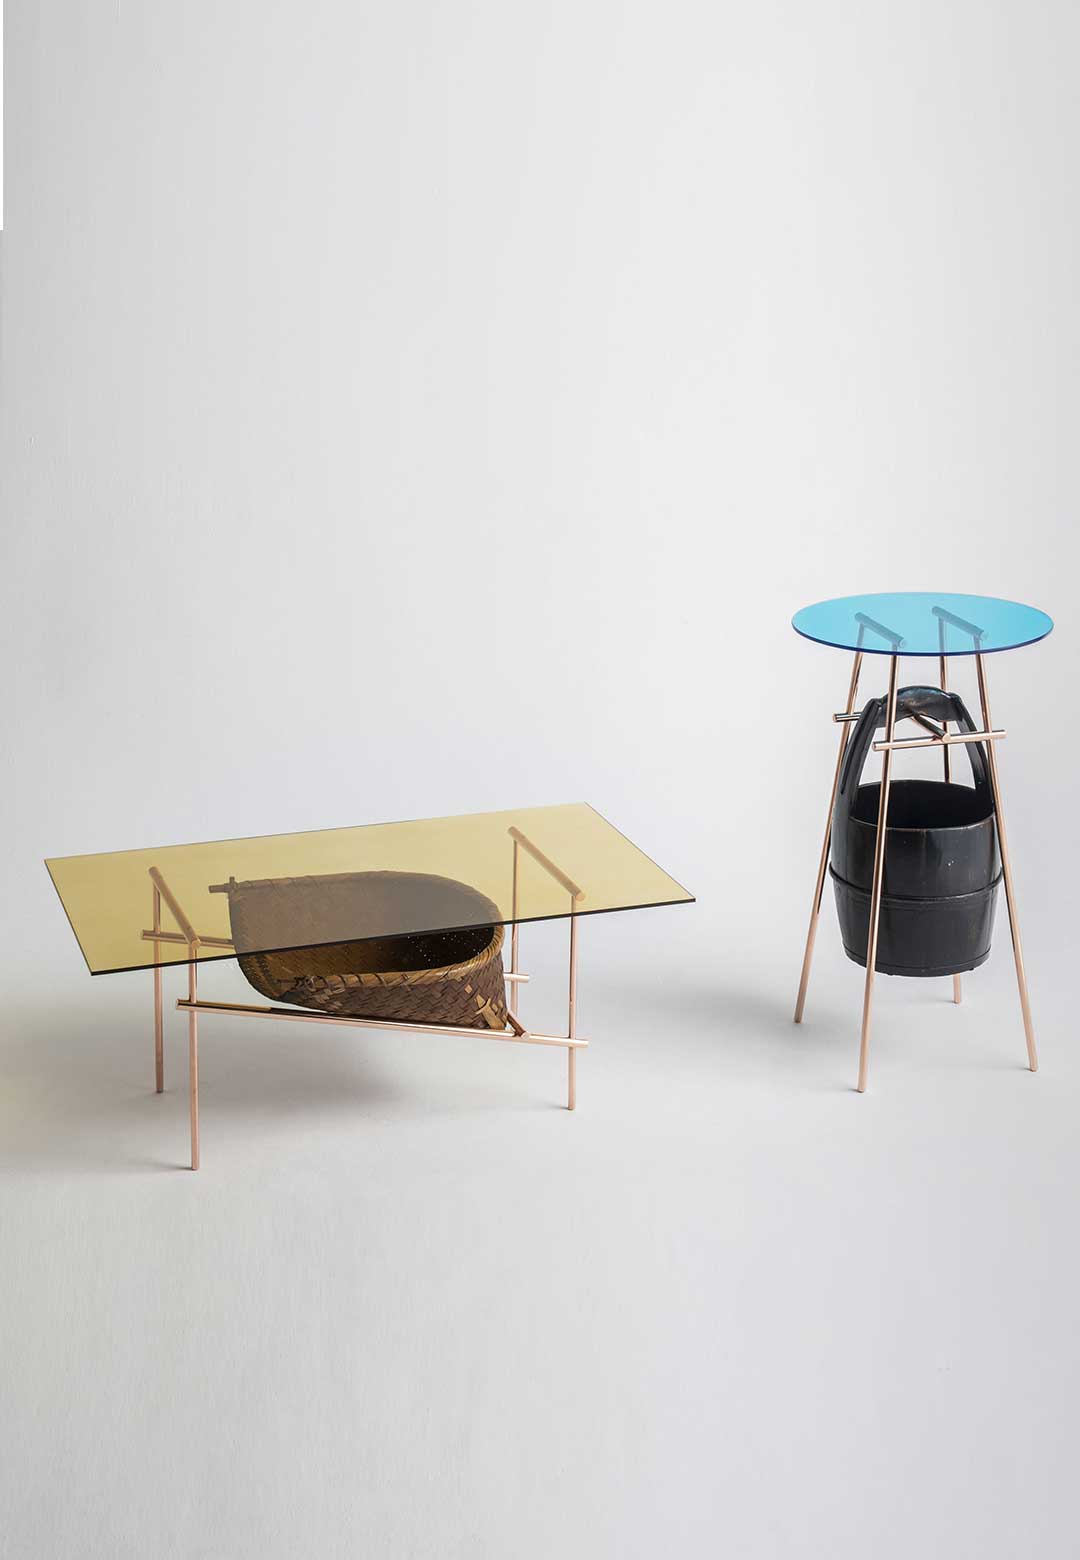 Ryosuke Harashima uses Japanese harvest tools to reinvent tables in ‘Still Life’ collection